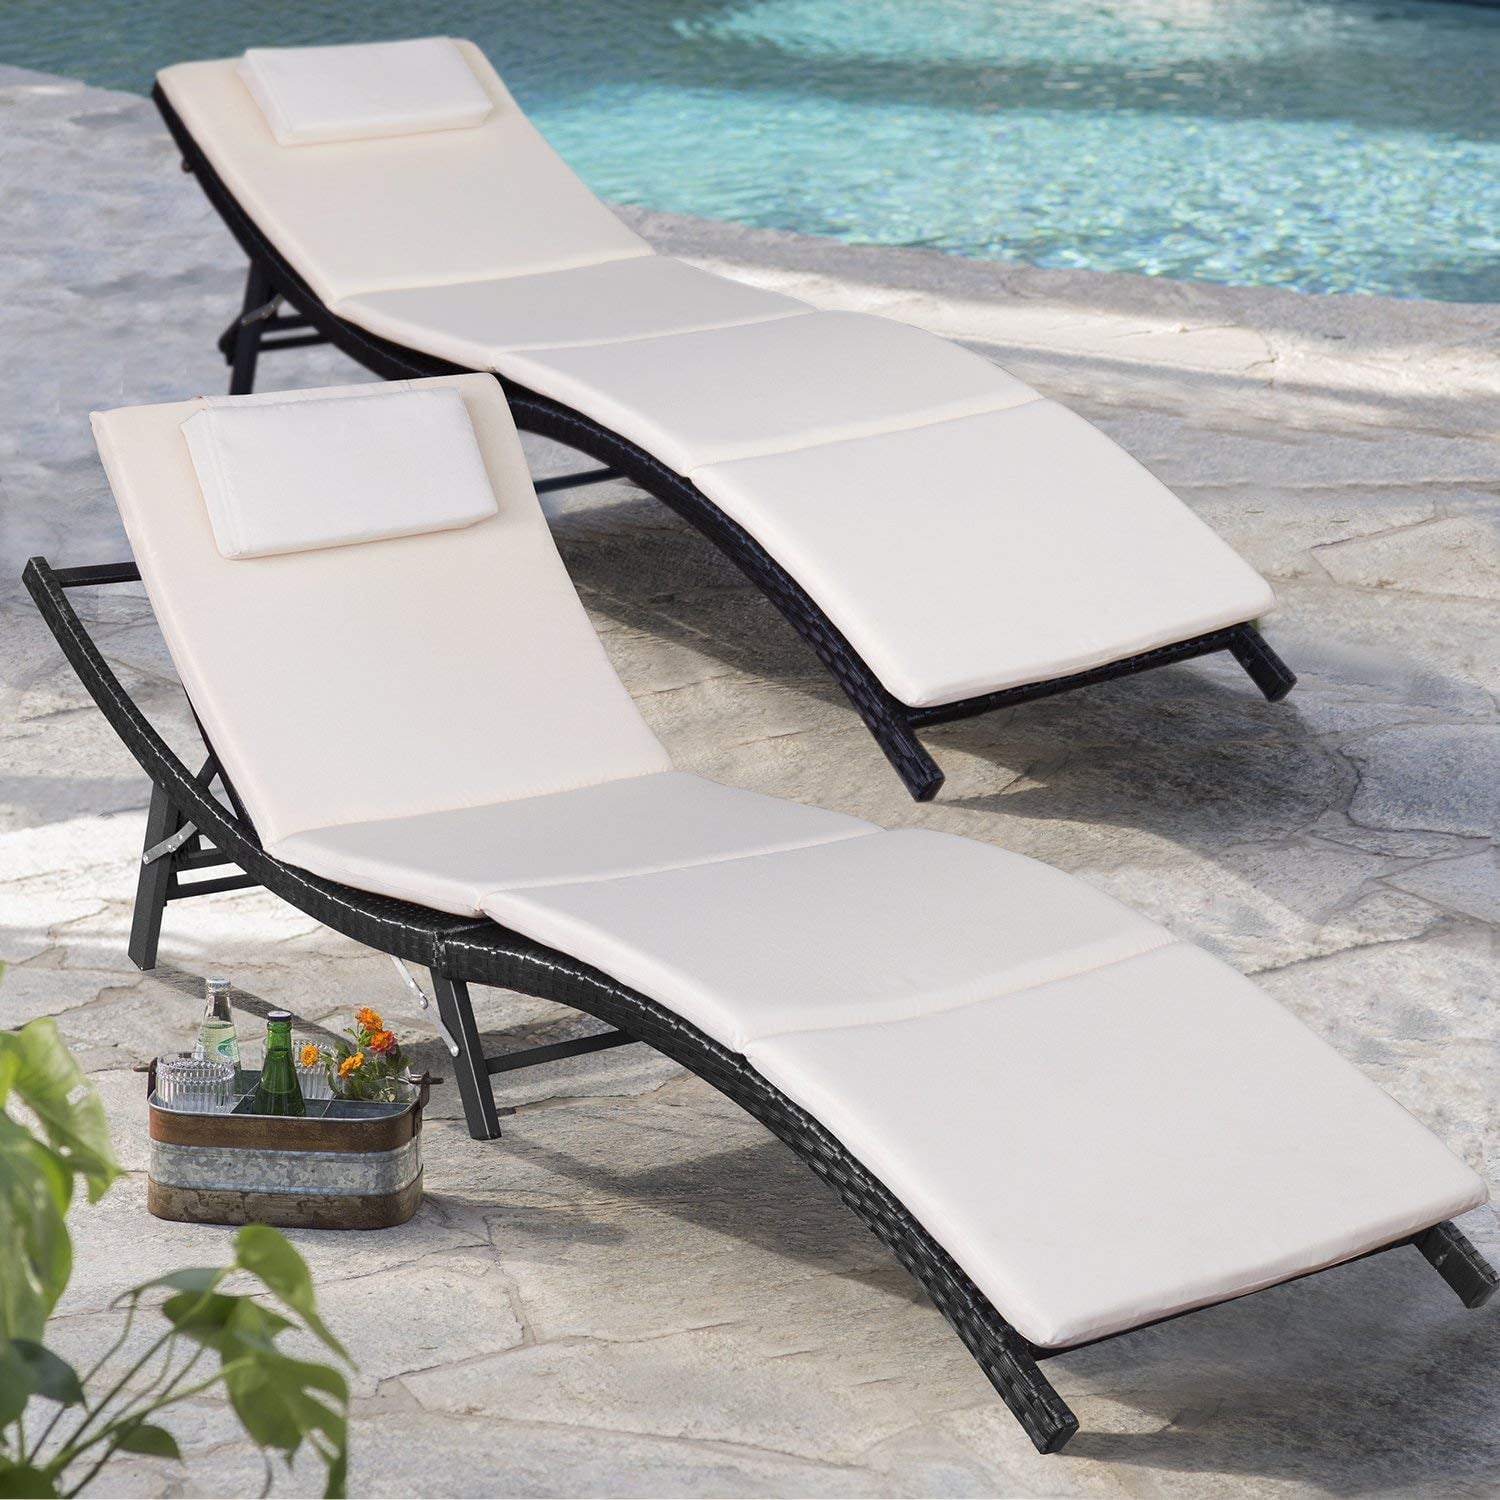 Wooden Sun Lounger Furniture  Bed Pool Outdoor Garden Patio Seats Chair Loung US 